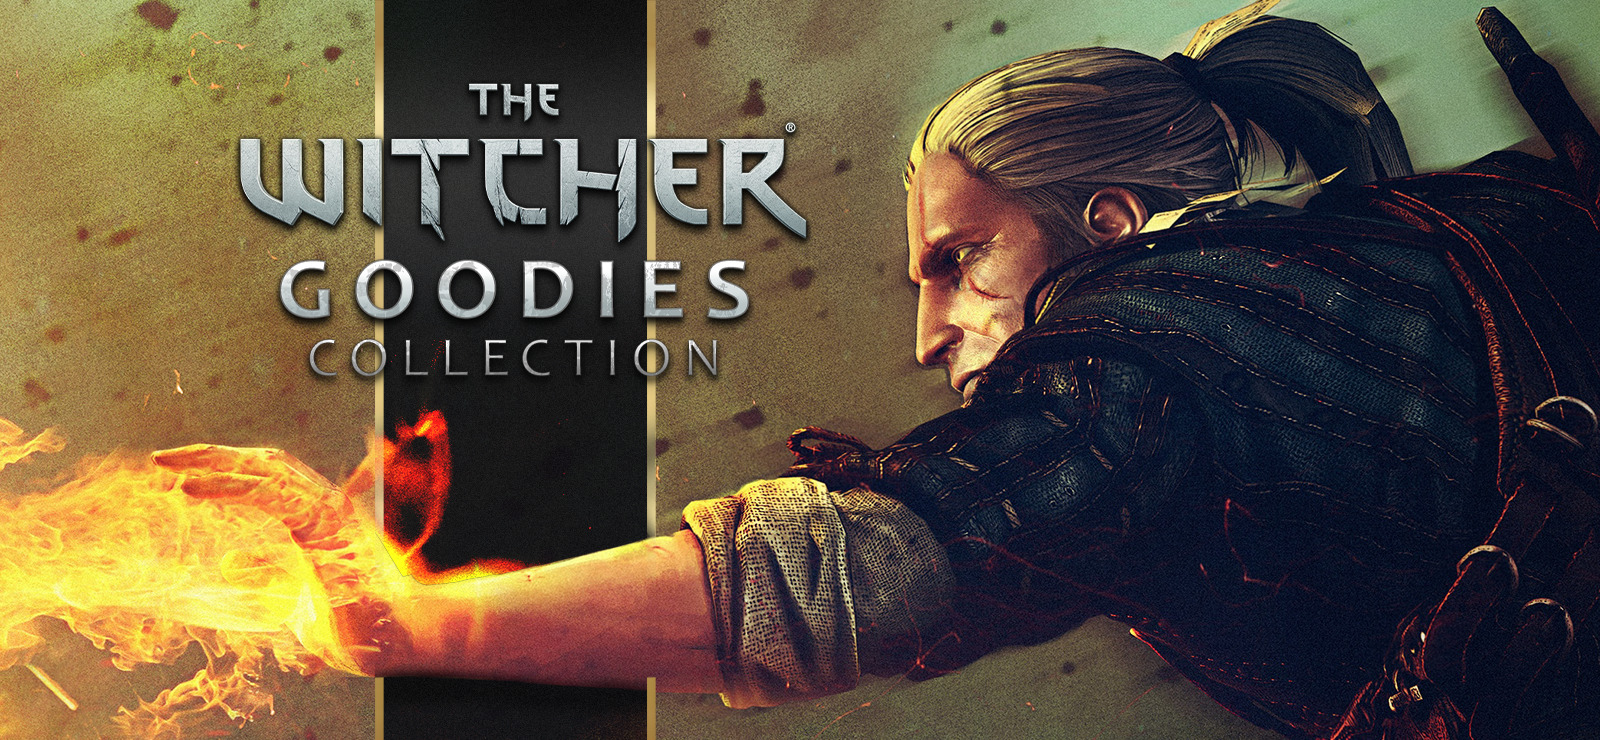 The Witcher - Goodies Collection GOG CD Key, 2.54$